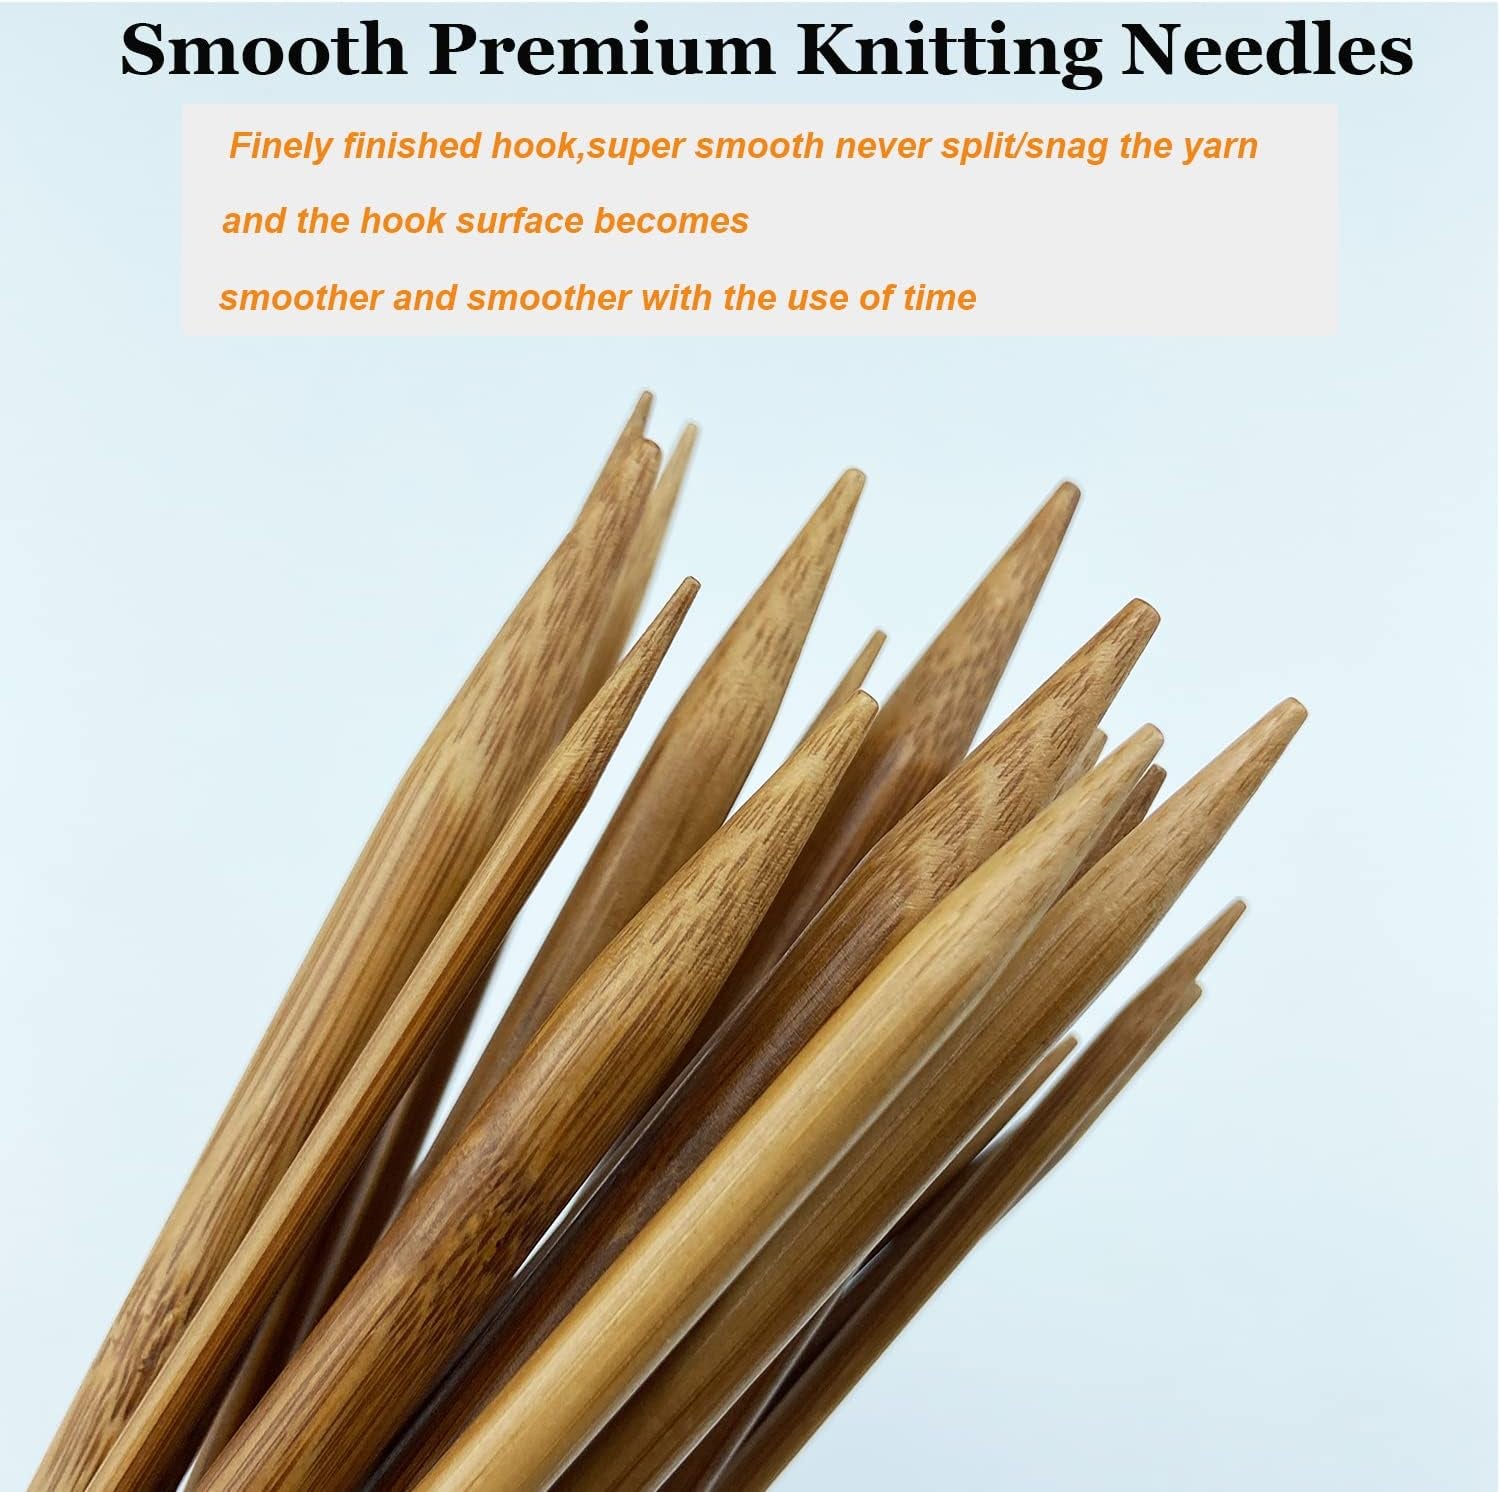 Bamboo Knitting Needle Straight Single Pointed Sweater Knitting Needles 13.8-Inch Length for Handmade DIY Knitting Projects,Size US 11(8Mm)